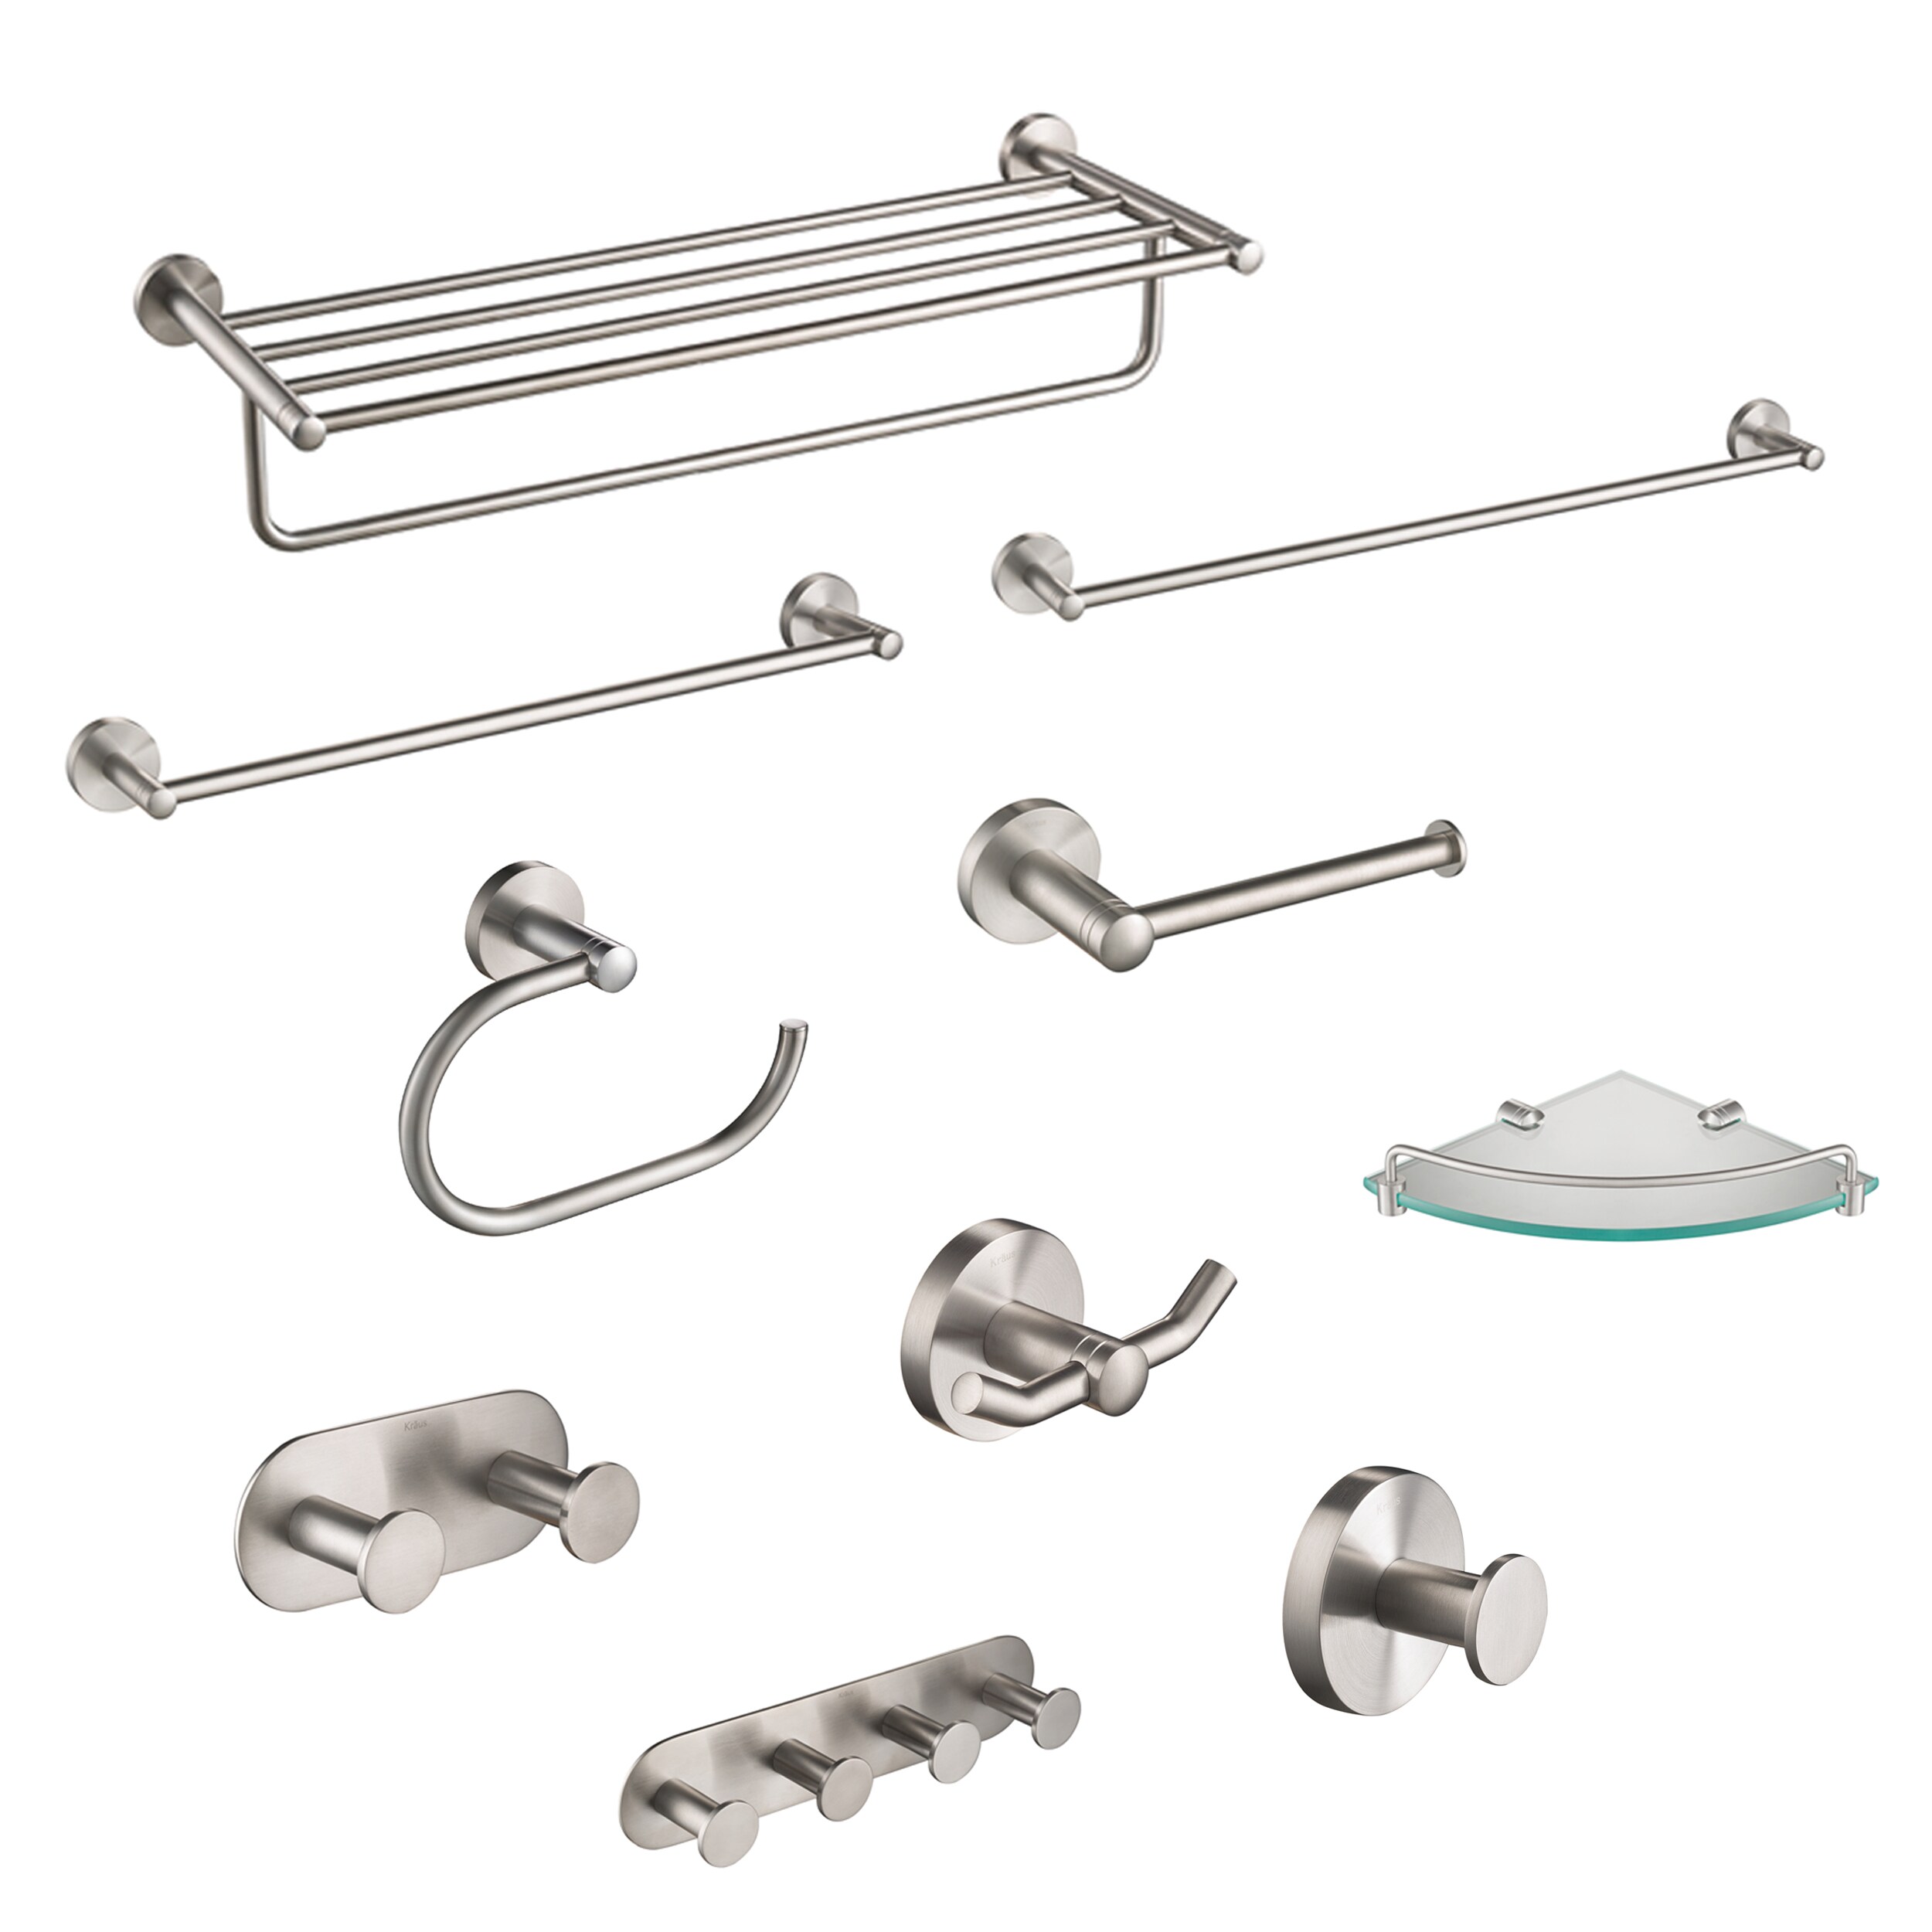 Rent the Stainless Steel Bathroom Accessories